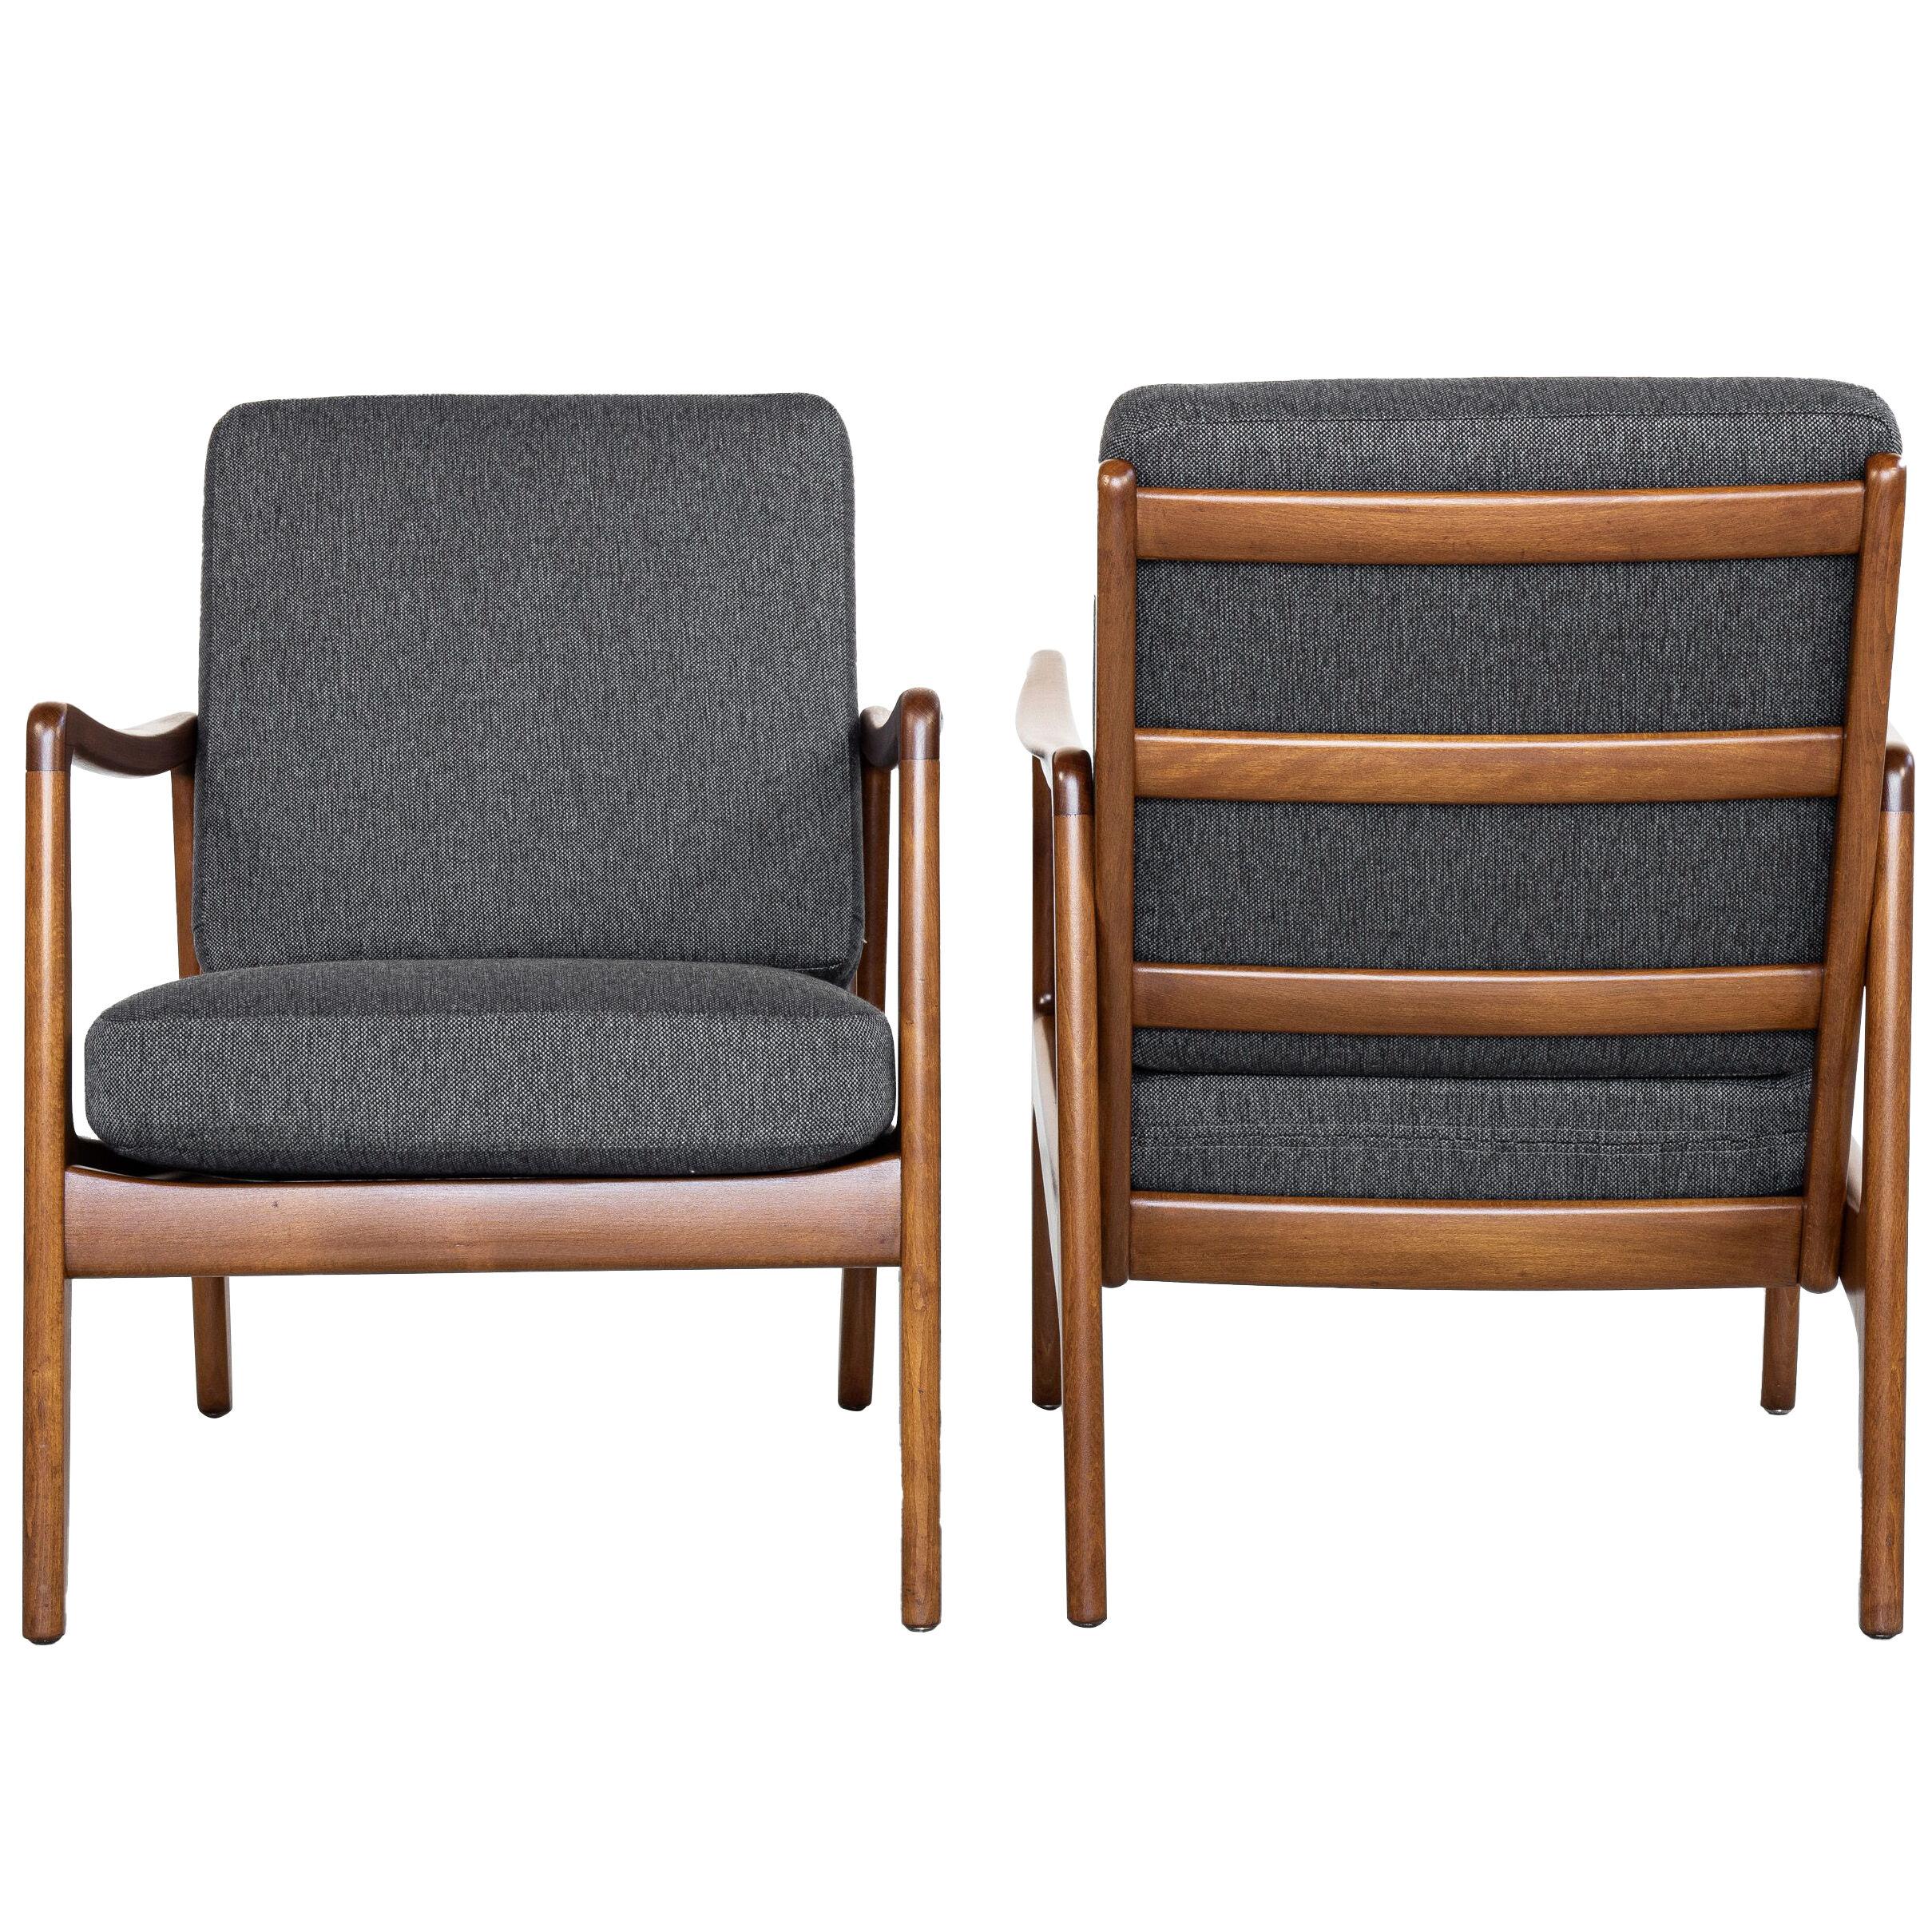 Midcentury Danish pair of easy chairs by Ole Wanscher for France & Daverkosen